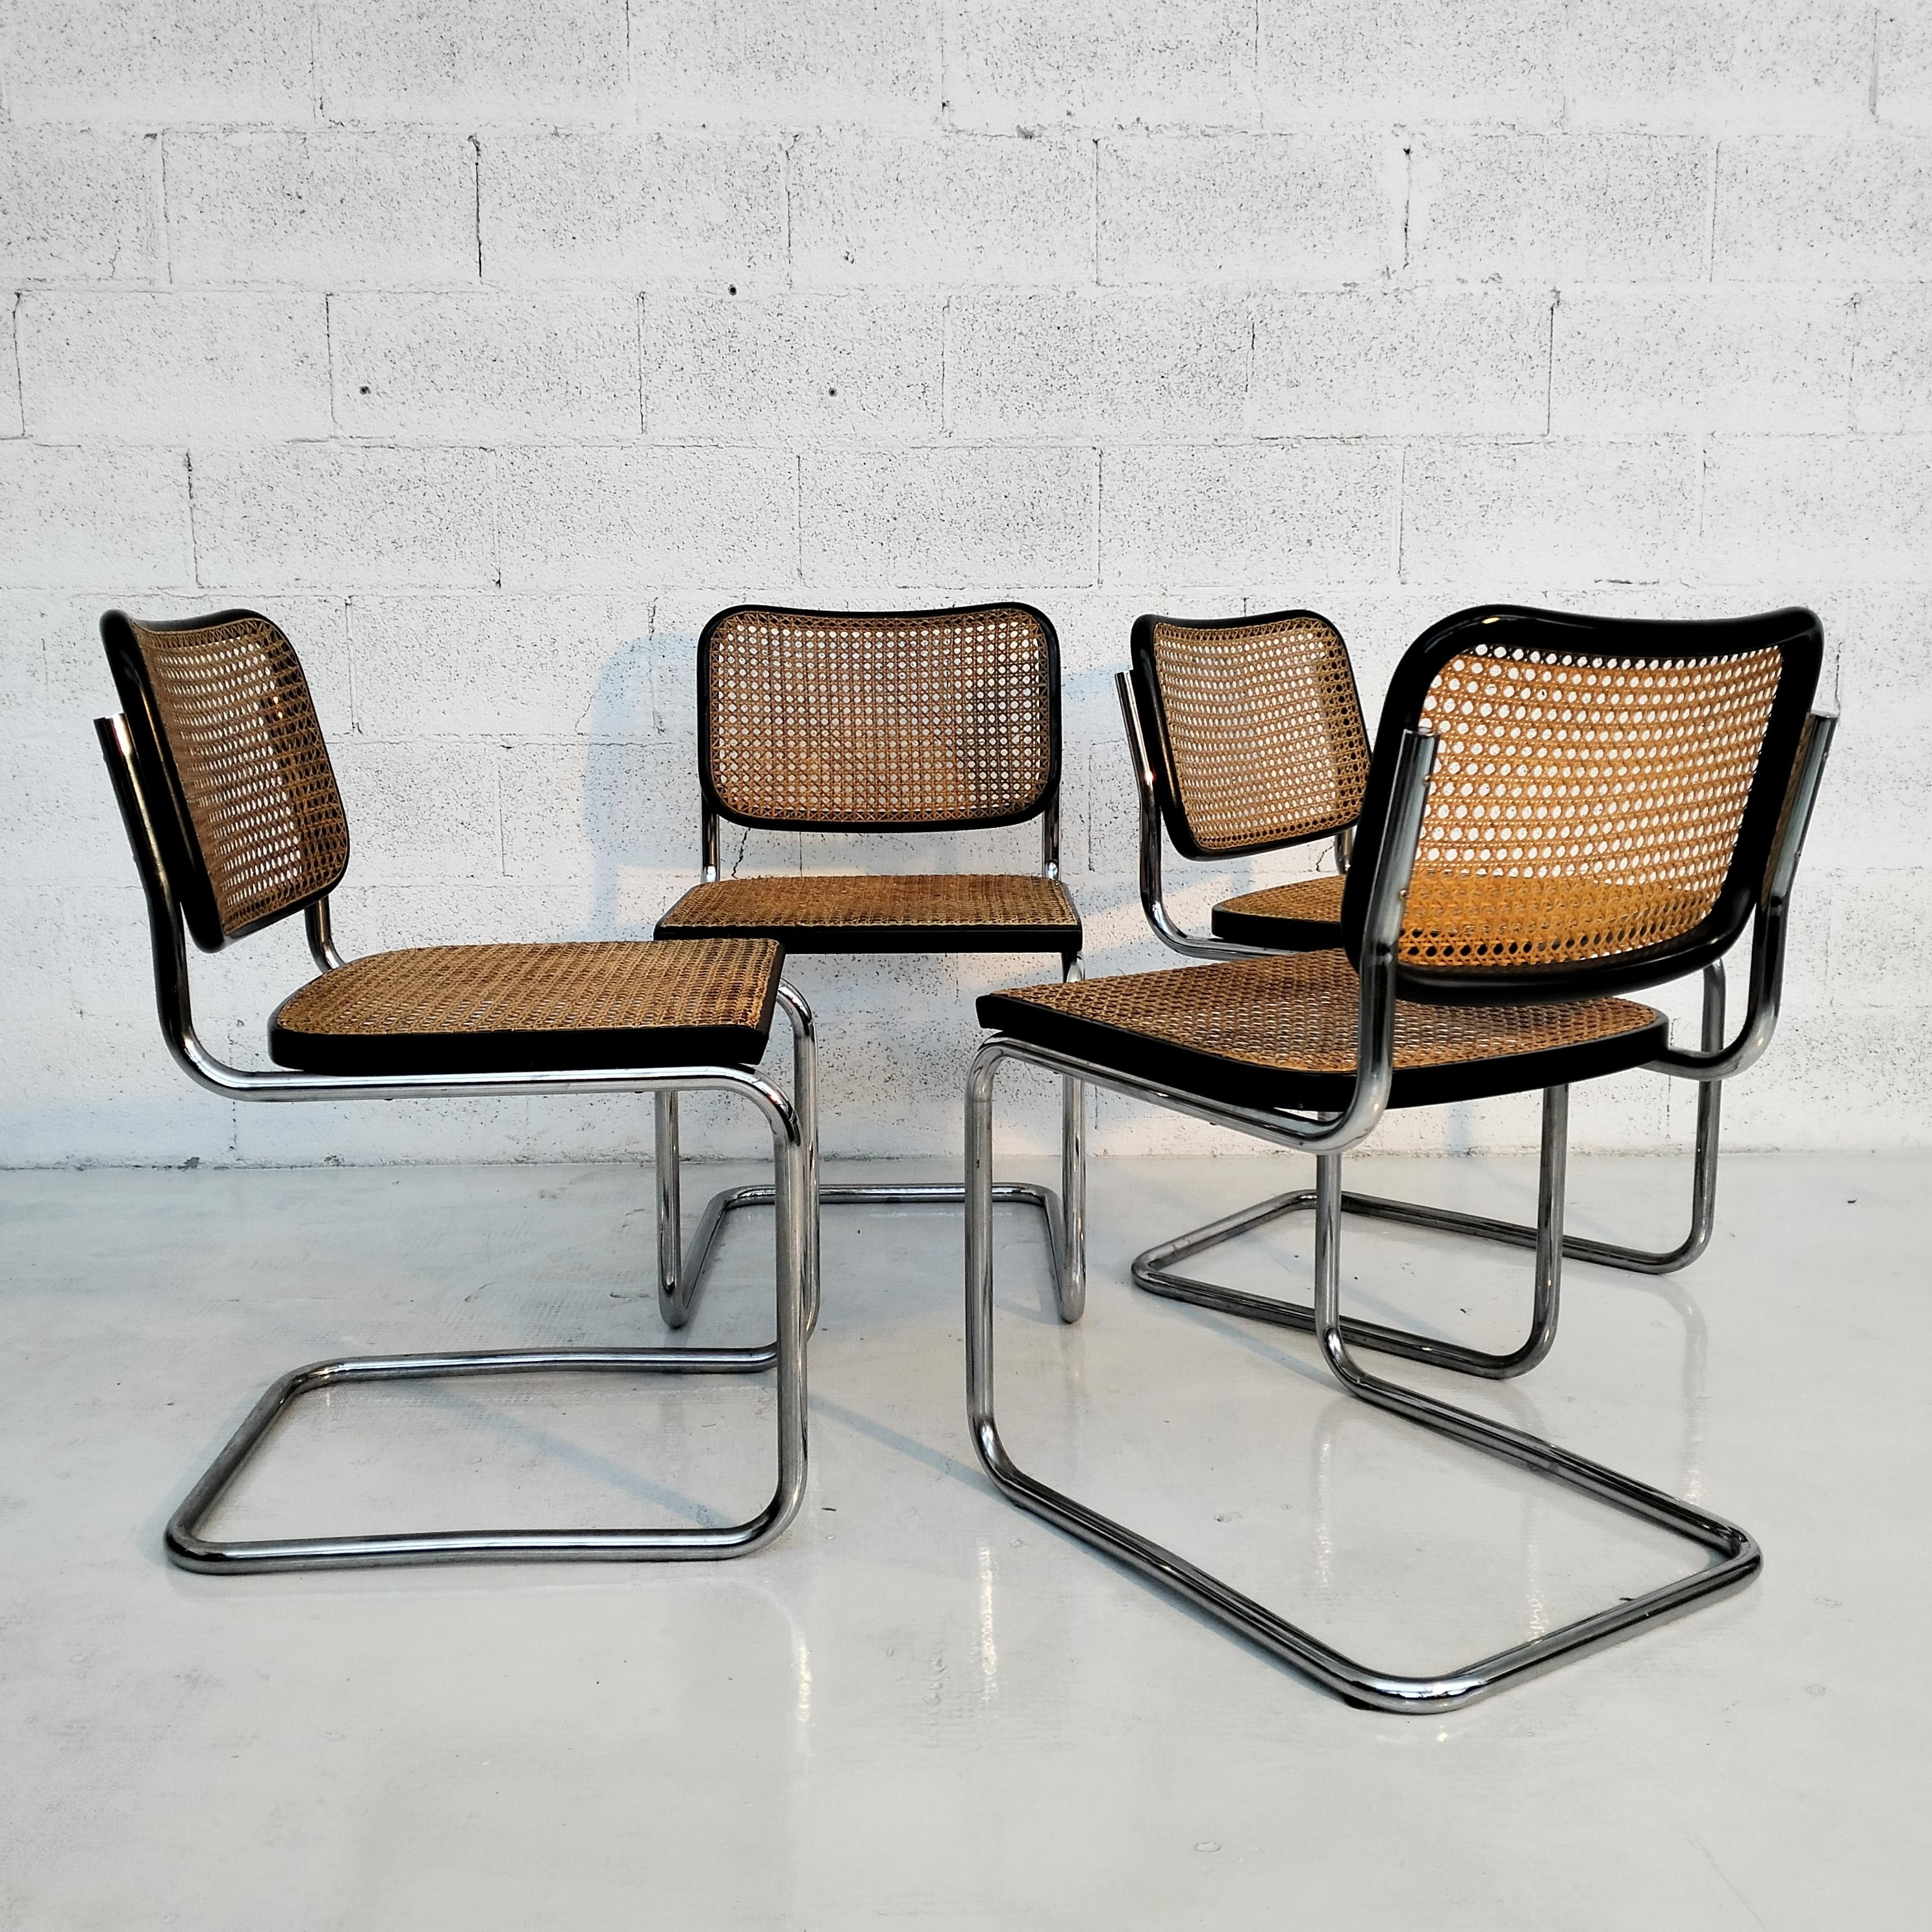 Original Cesca chair by Marcel Lajos Breuer for Gavina - Italy - with original label.
Back lowered walnut wood - crome tubolari steel frame - Vienna straw. In the Cesca chair you can find the top of Made in Italy quality. This work by the Austrian